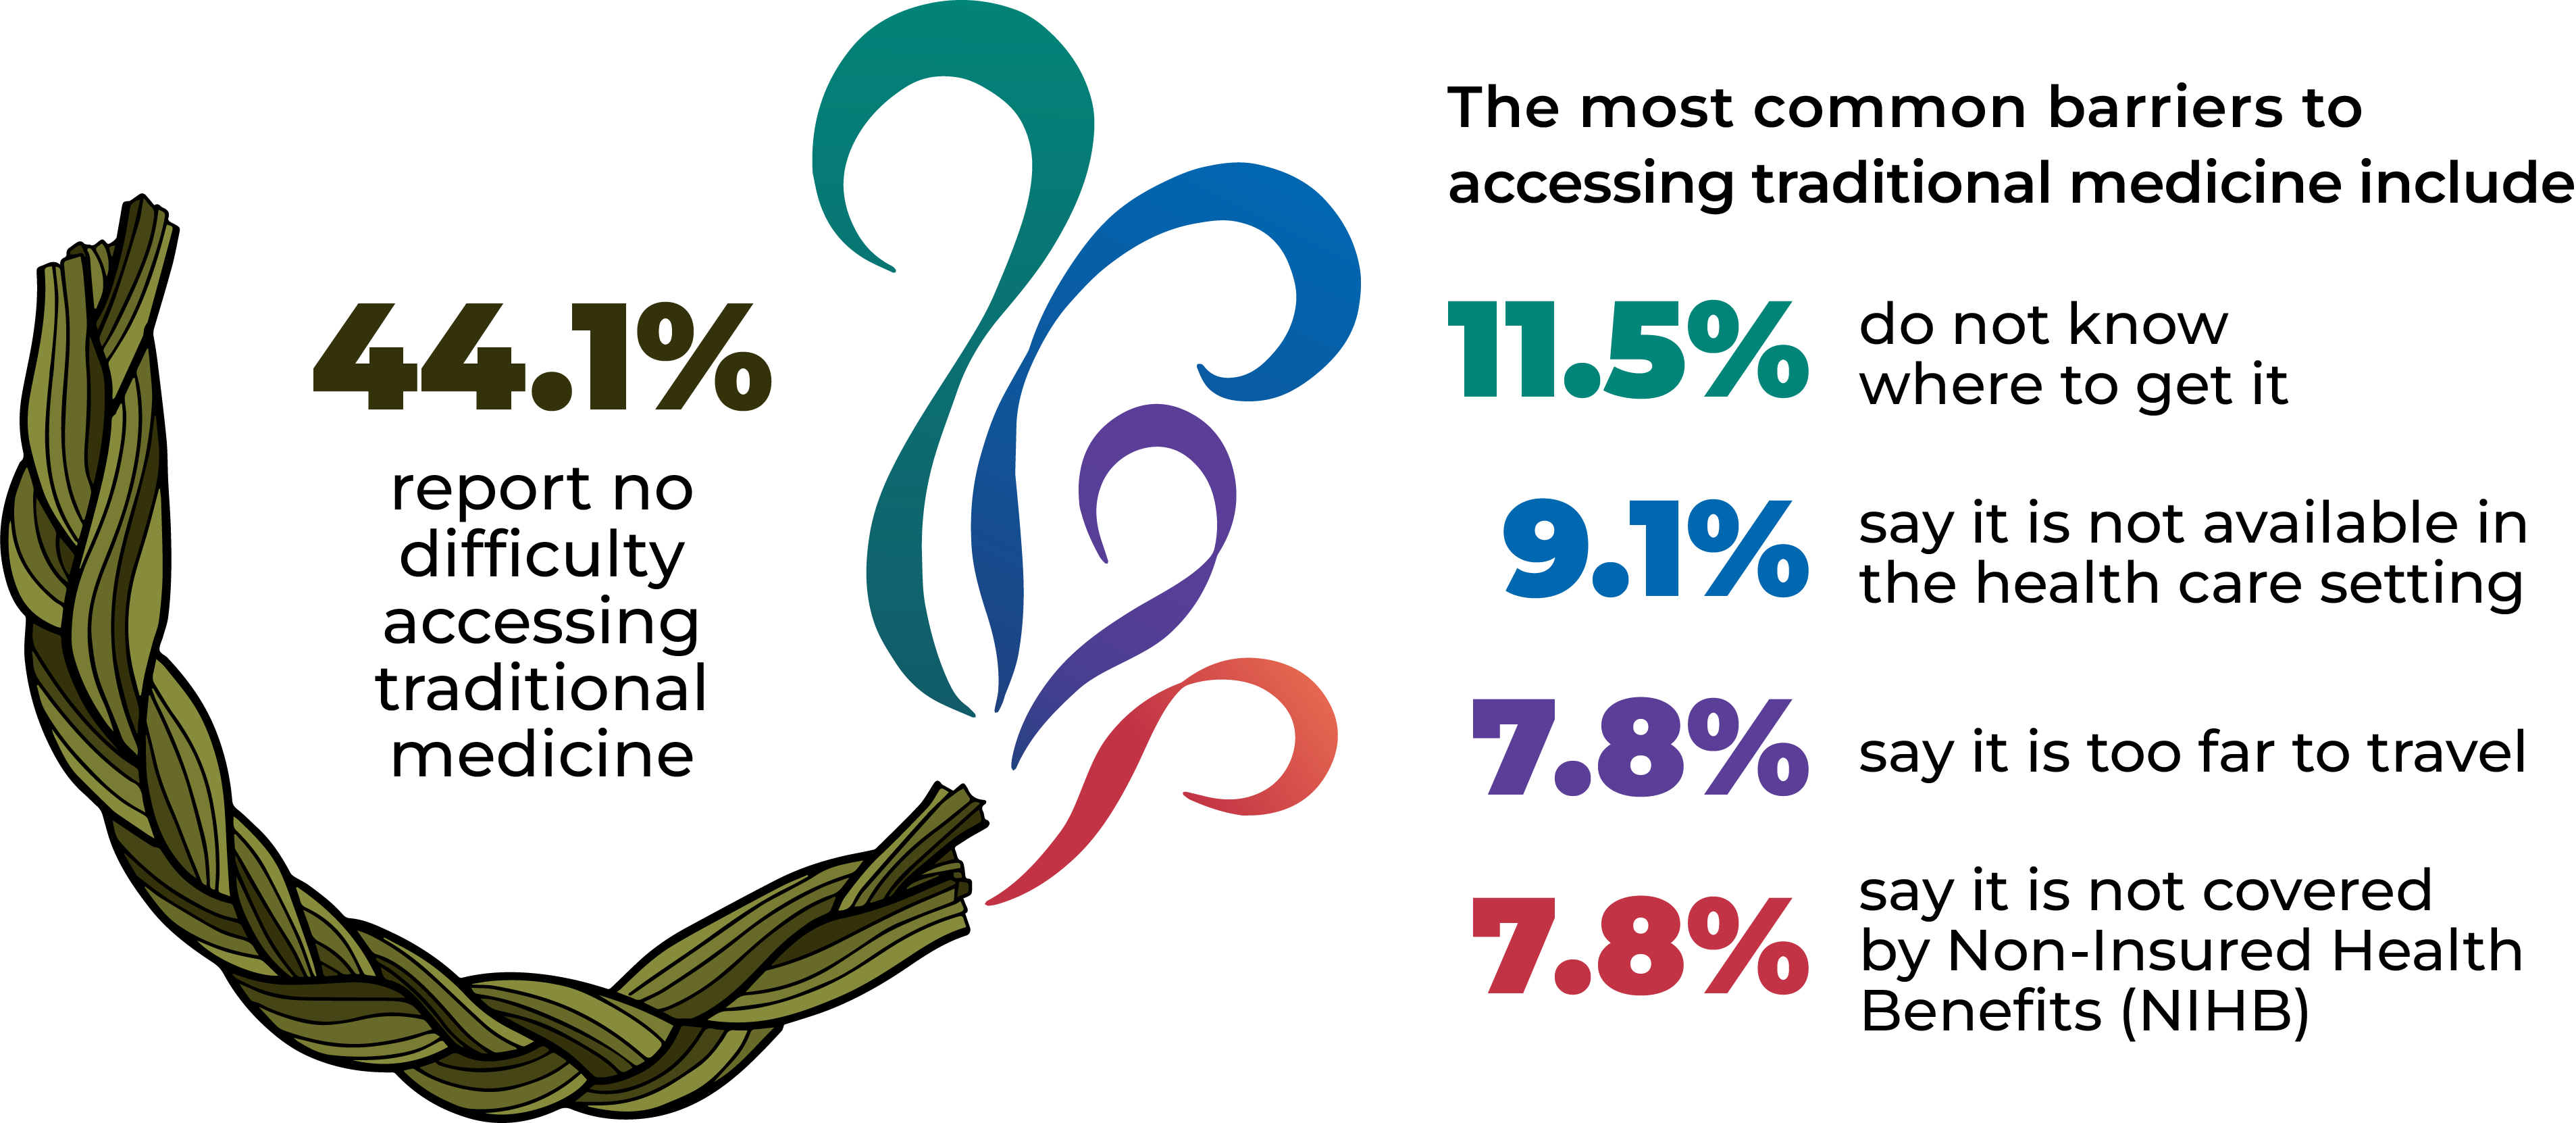 44.1% report no difficulty accessing traditional medicine. The most common barriers to accessing traditional medicine include 11.5% do not know where to get it; 9.1% say it is not available in the healthcare setting; 7.8% say it is too far to travel; and 7.8% say it not covered by NIHB.